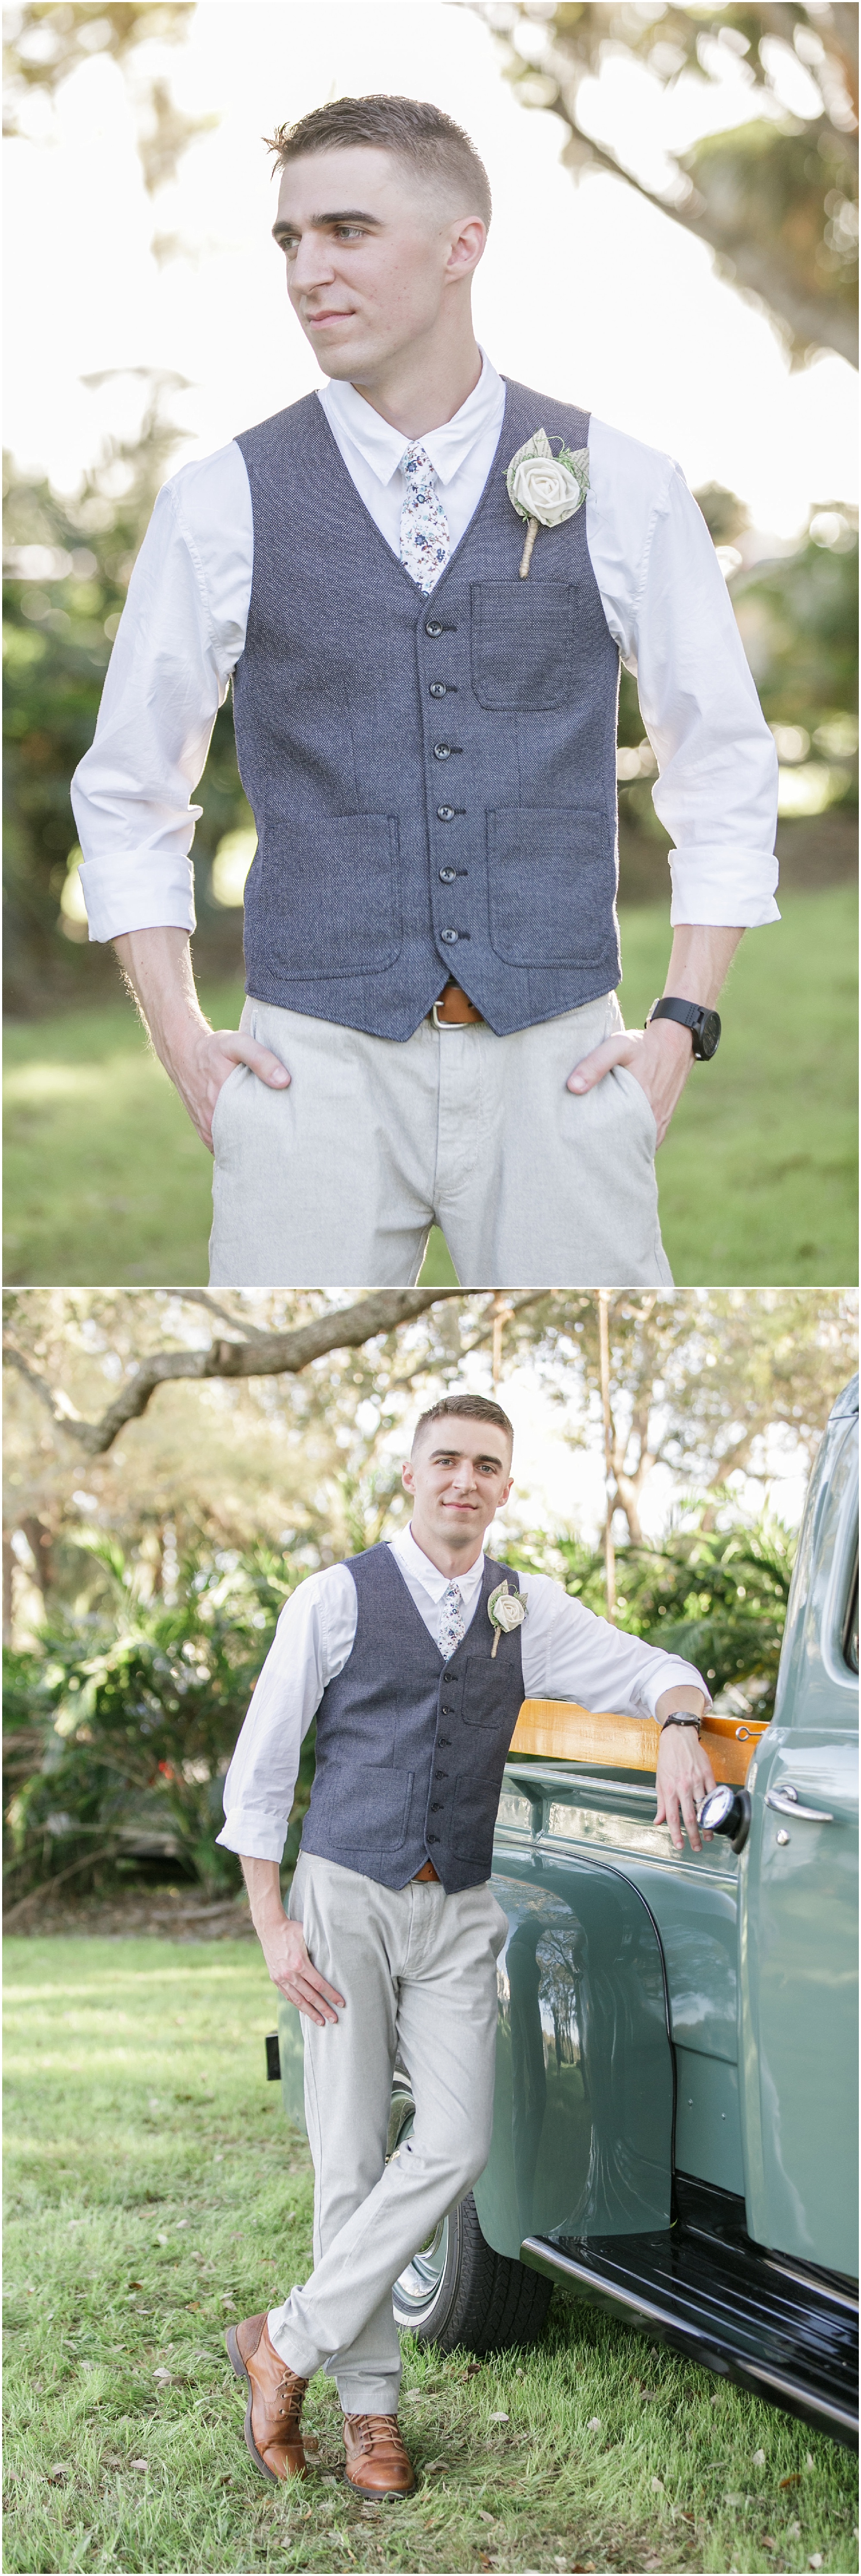 Portraits of the groom next to antique truck